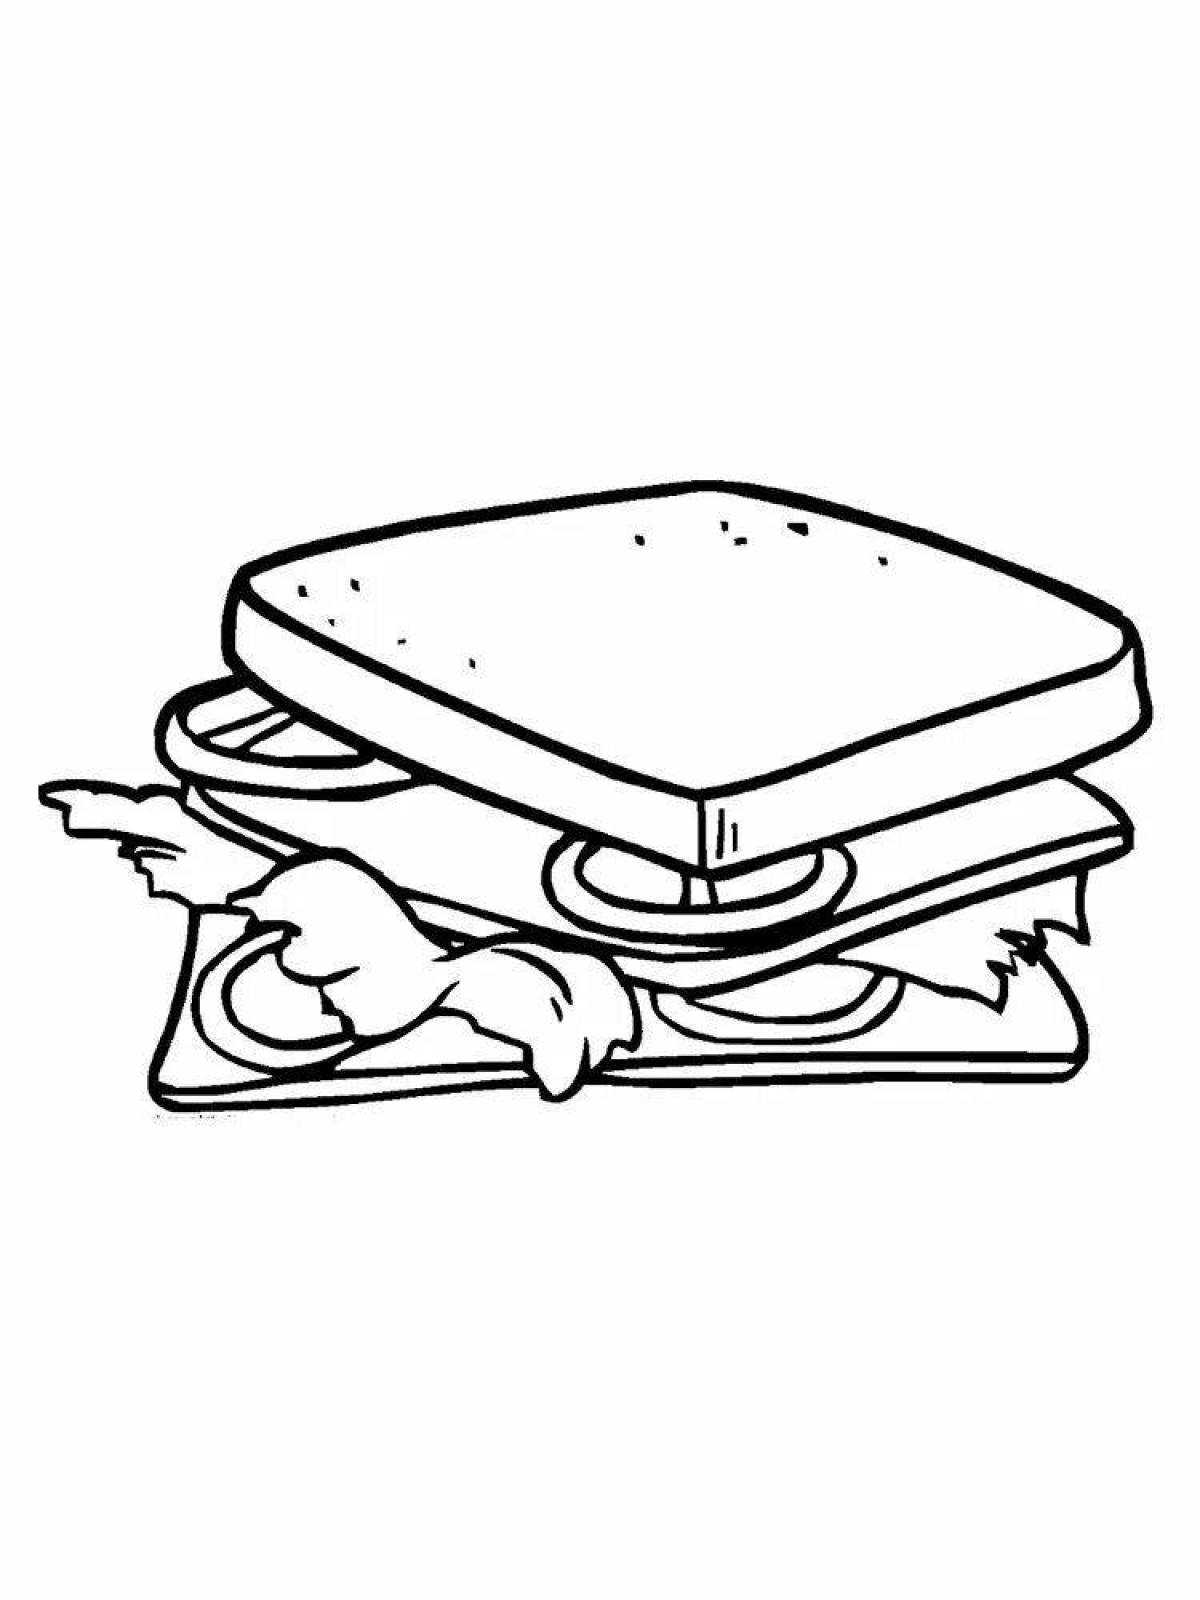 Puff sandwich coloring page